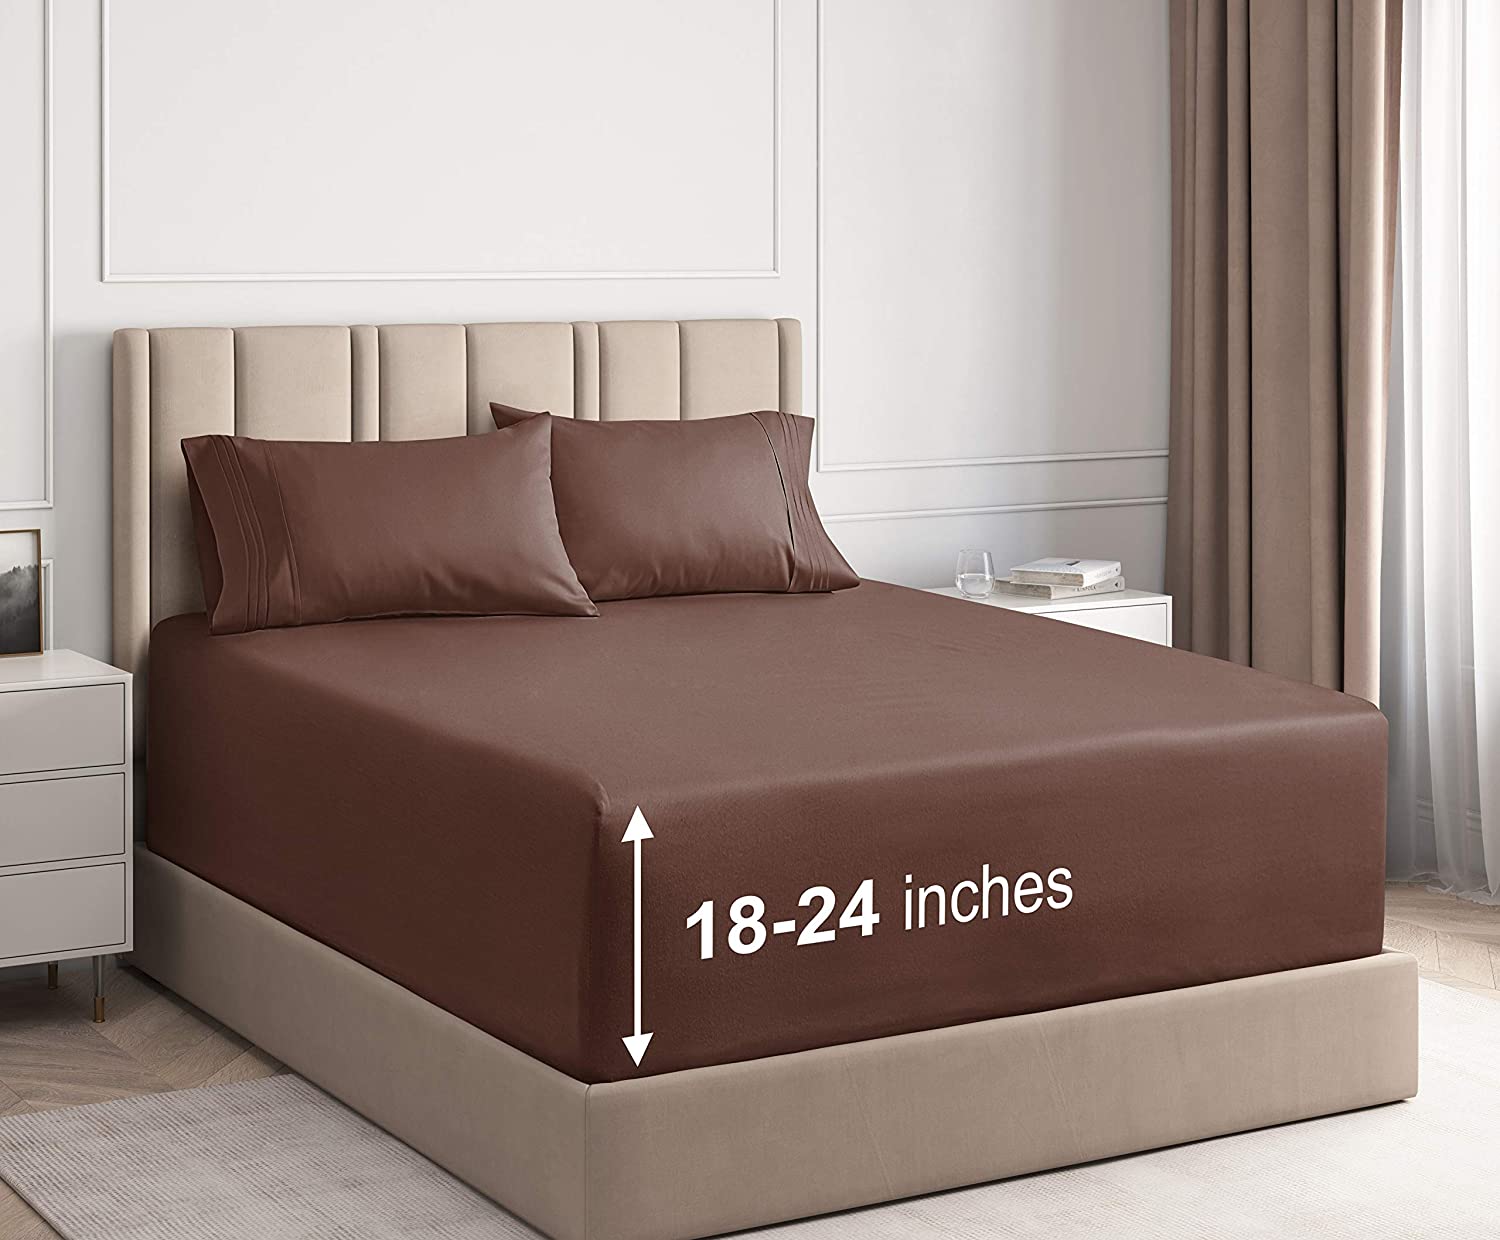 CGK Unlimited Breathable Microfiber Bed Sheets